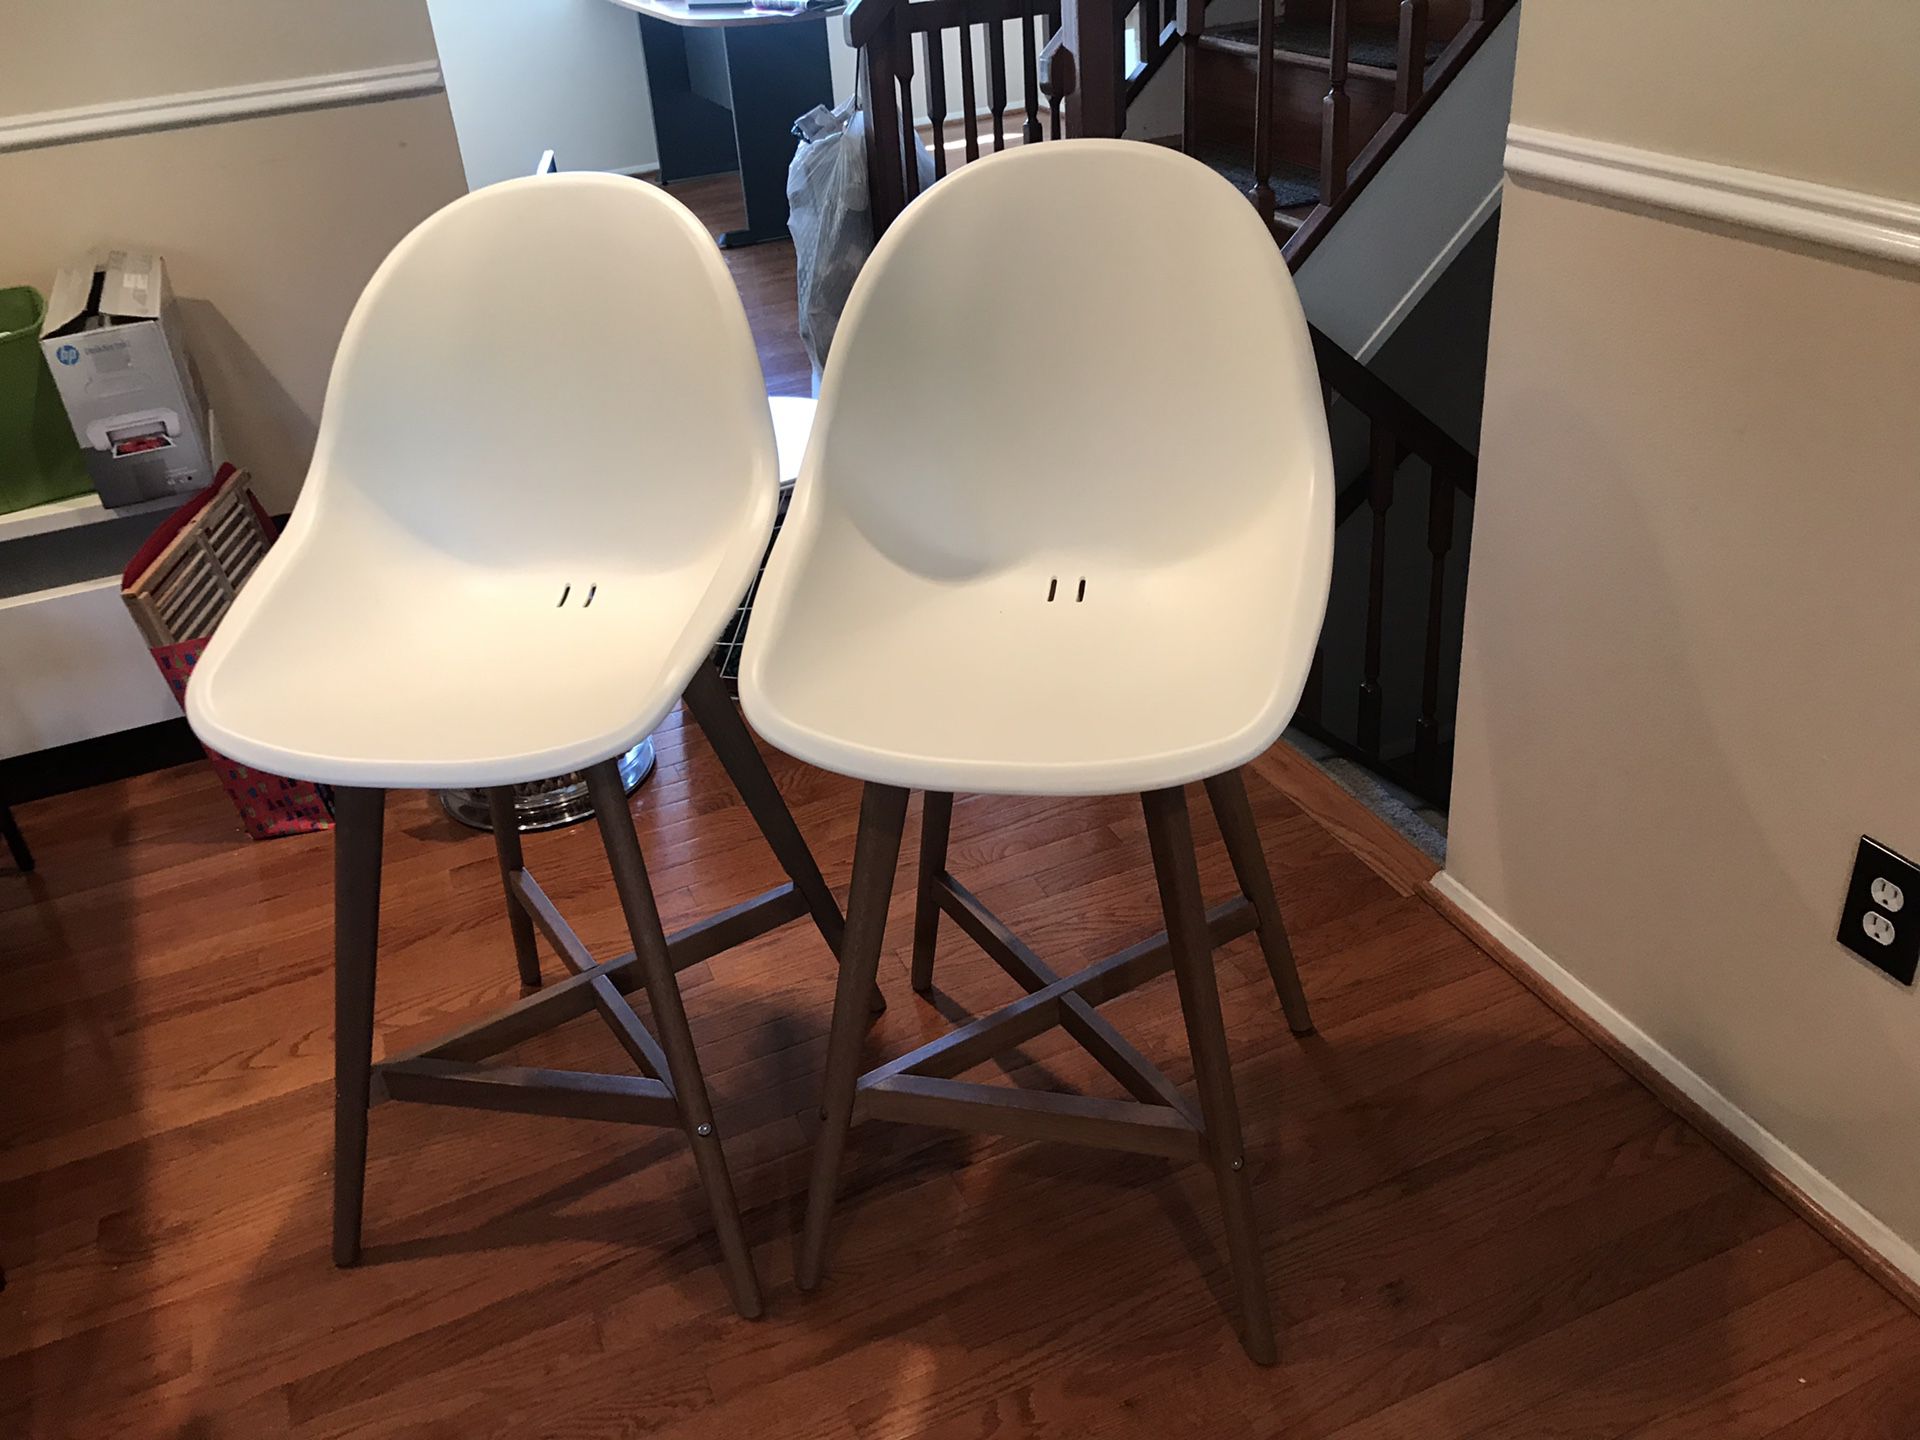 IKEA bar stools and shorter mid century style chairs